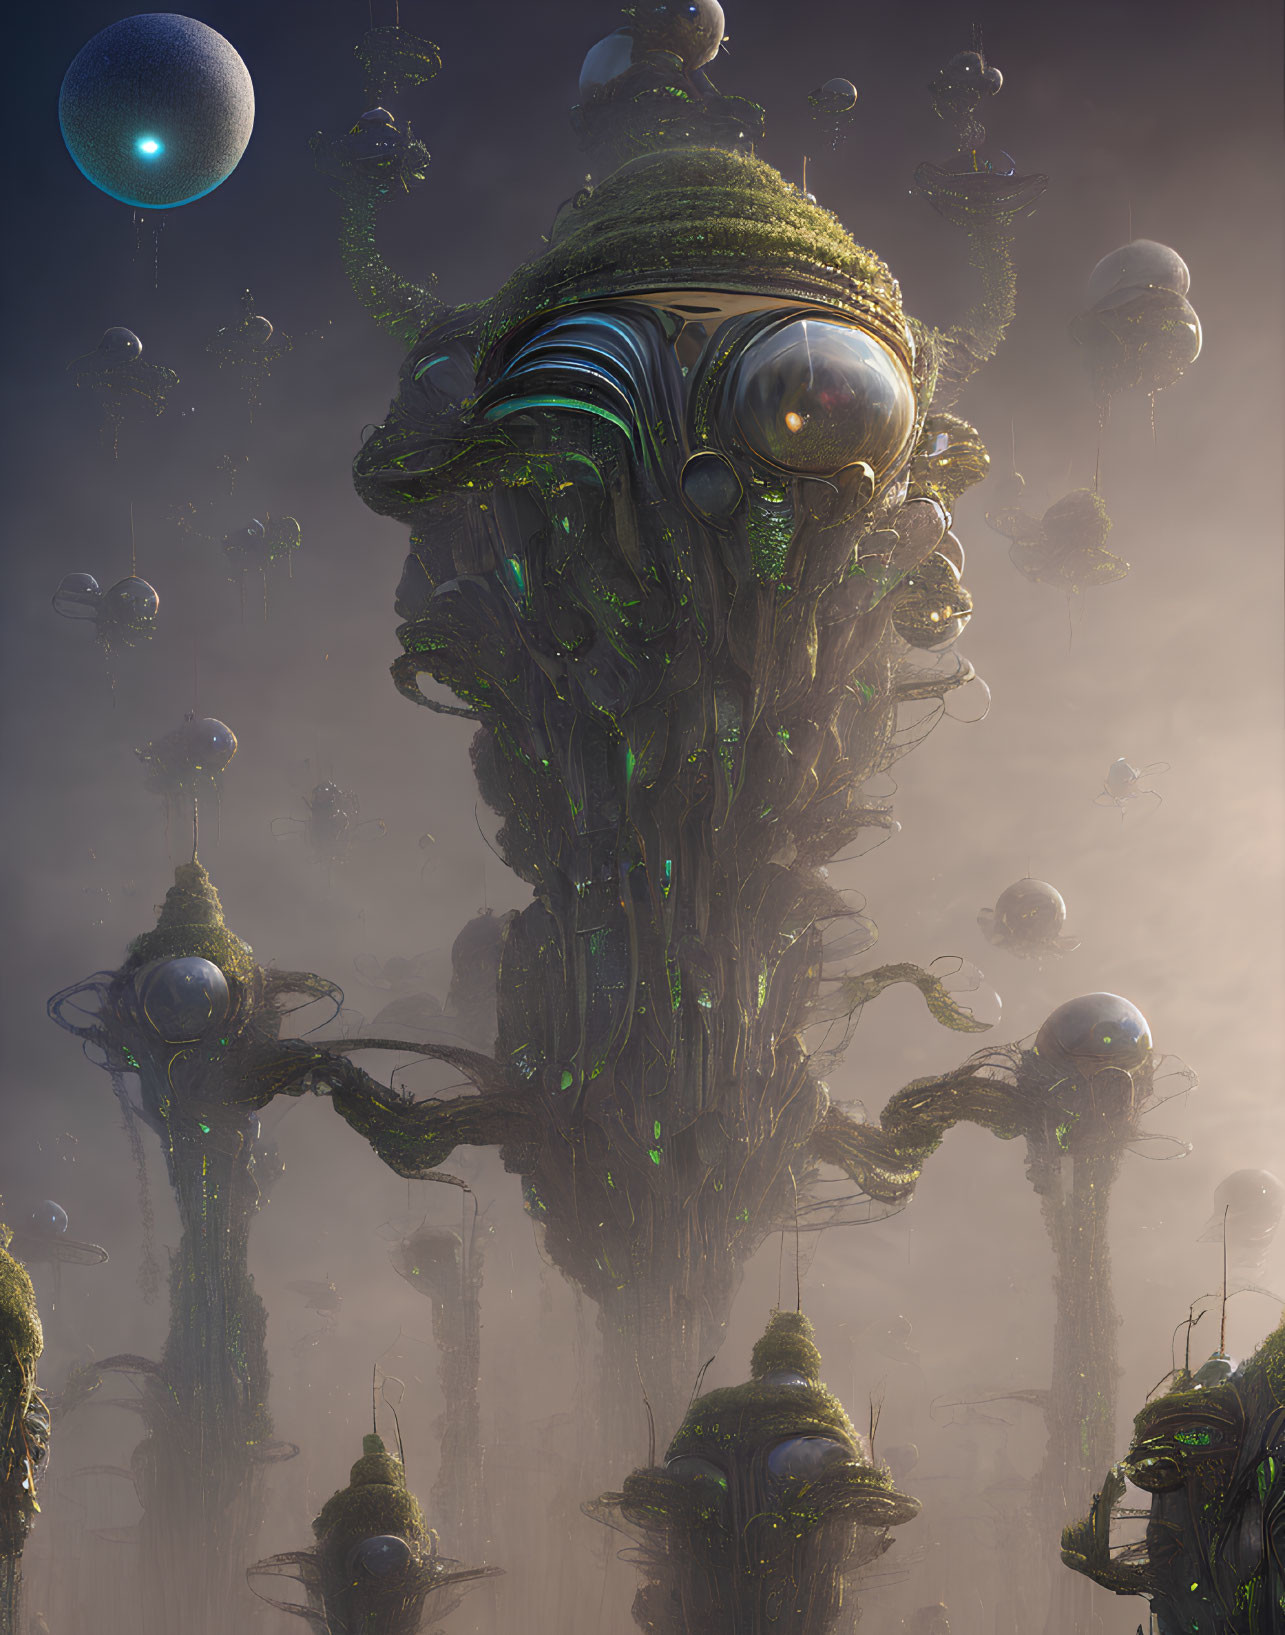 Futuristic organic towers with greenery and spherical structures in mist